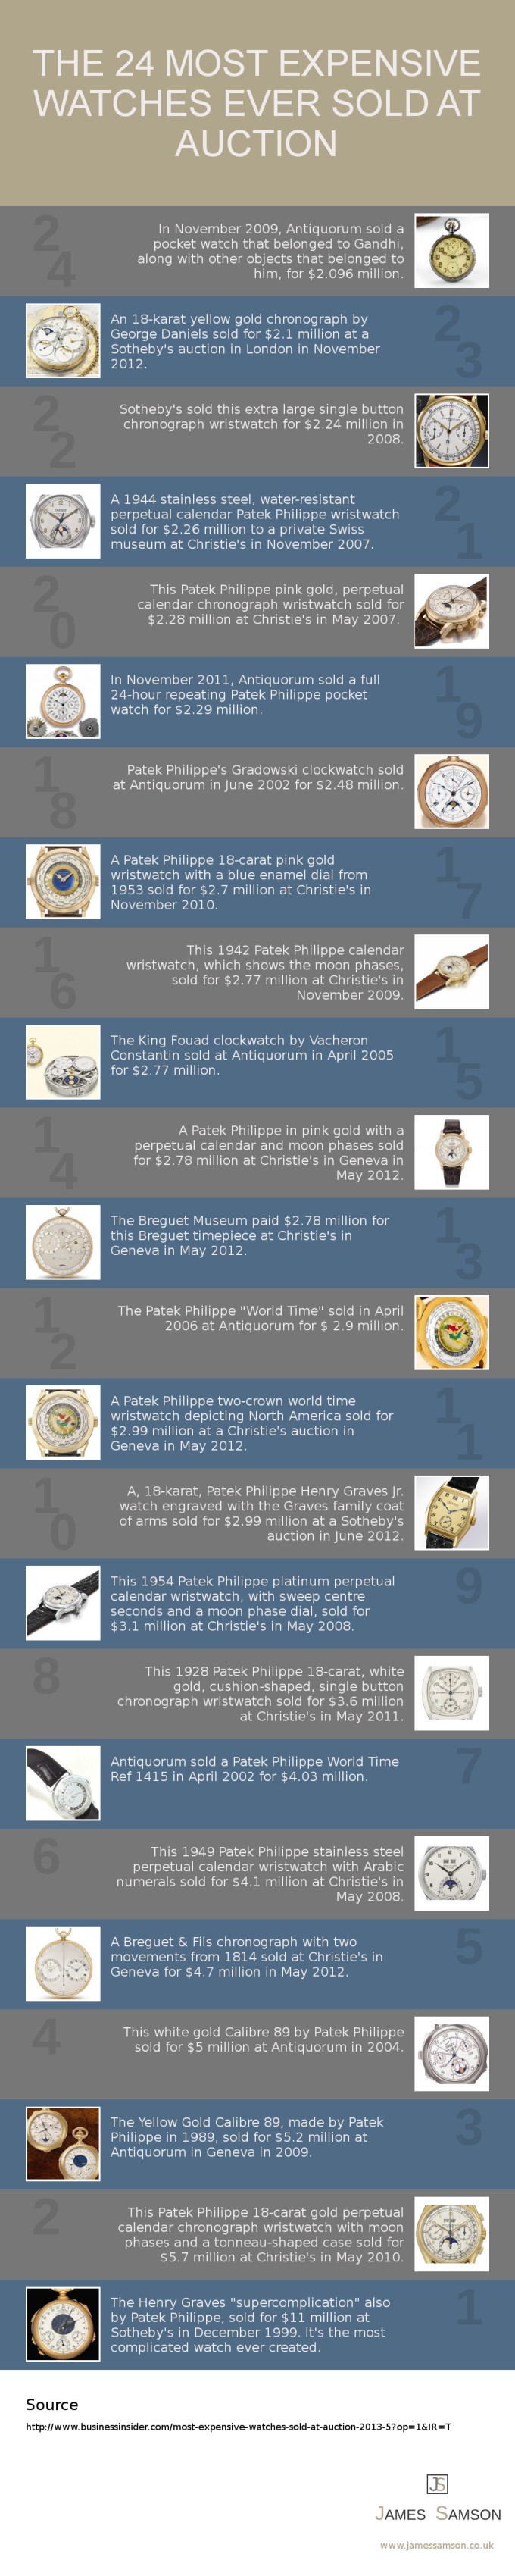 most-expensive-watches-sold-at-auction